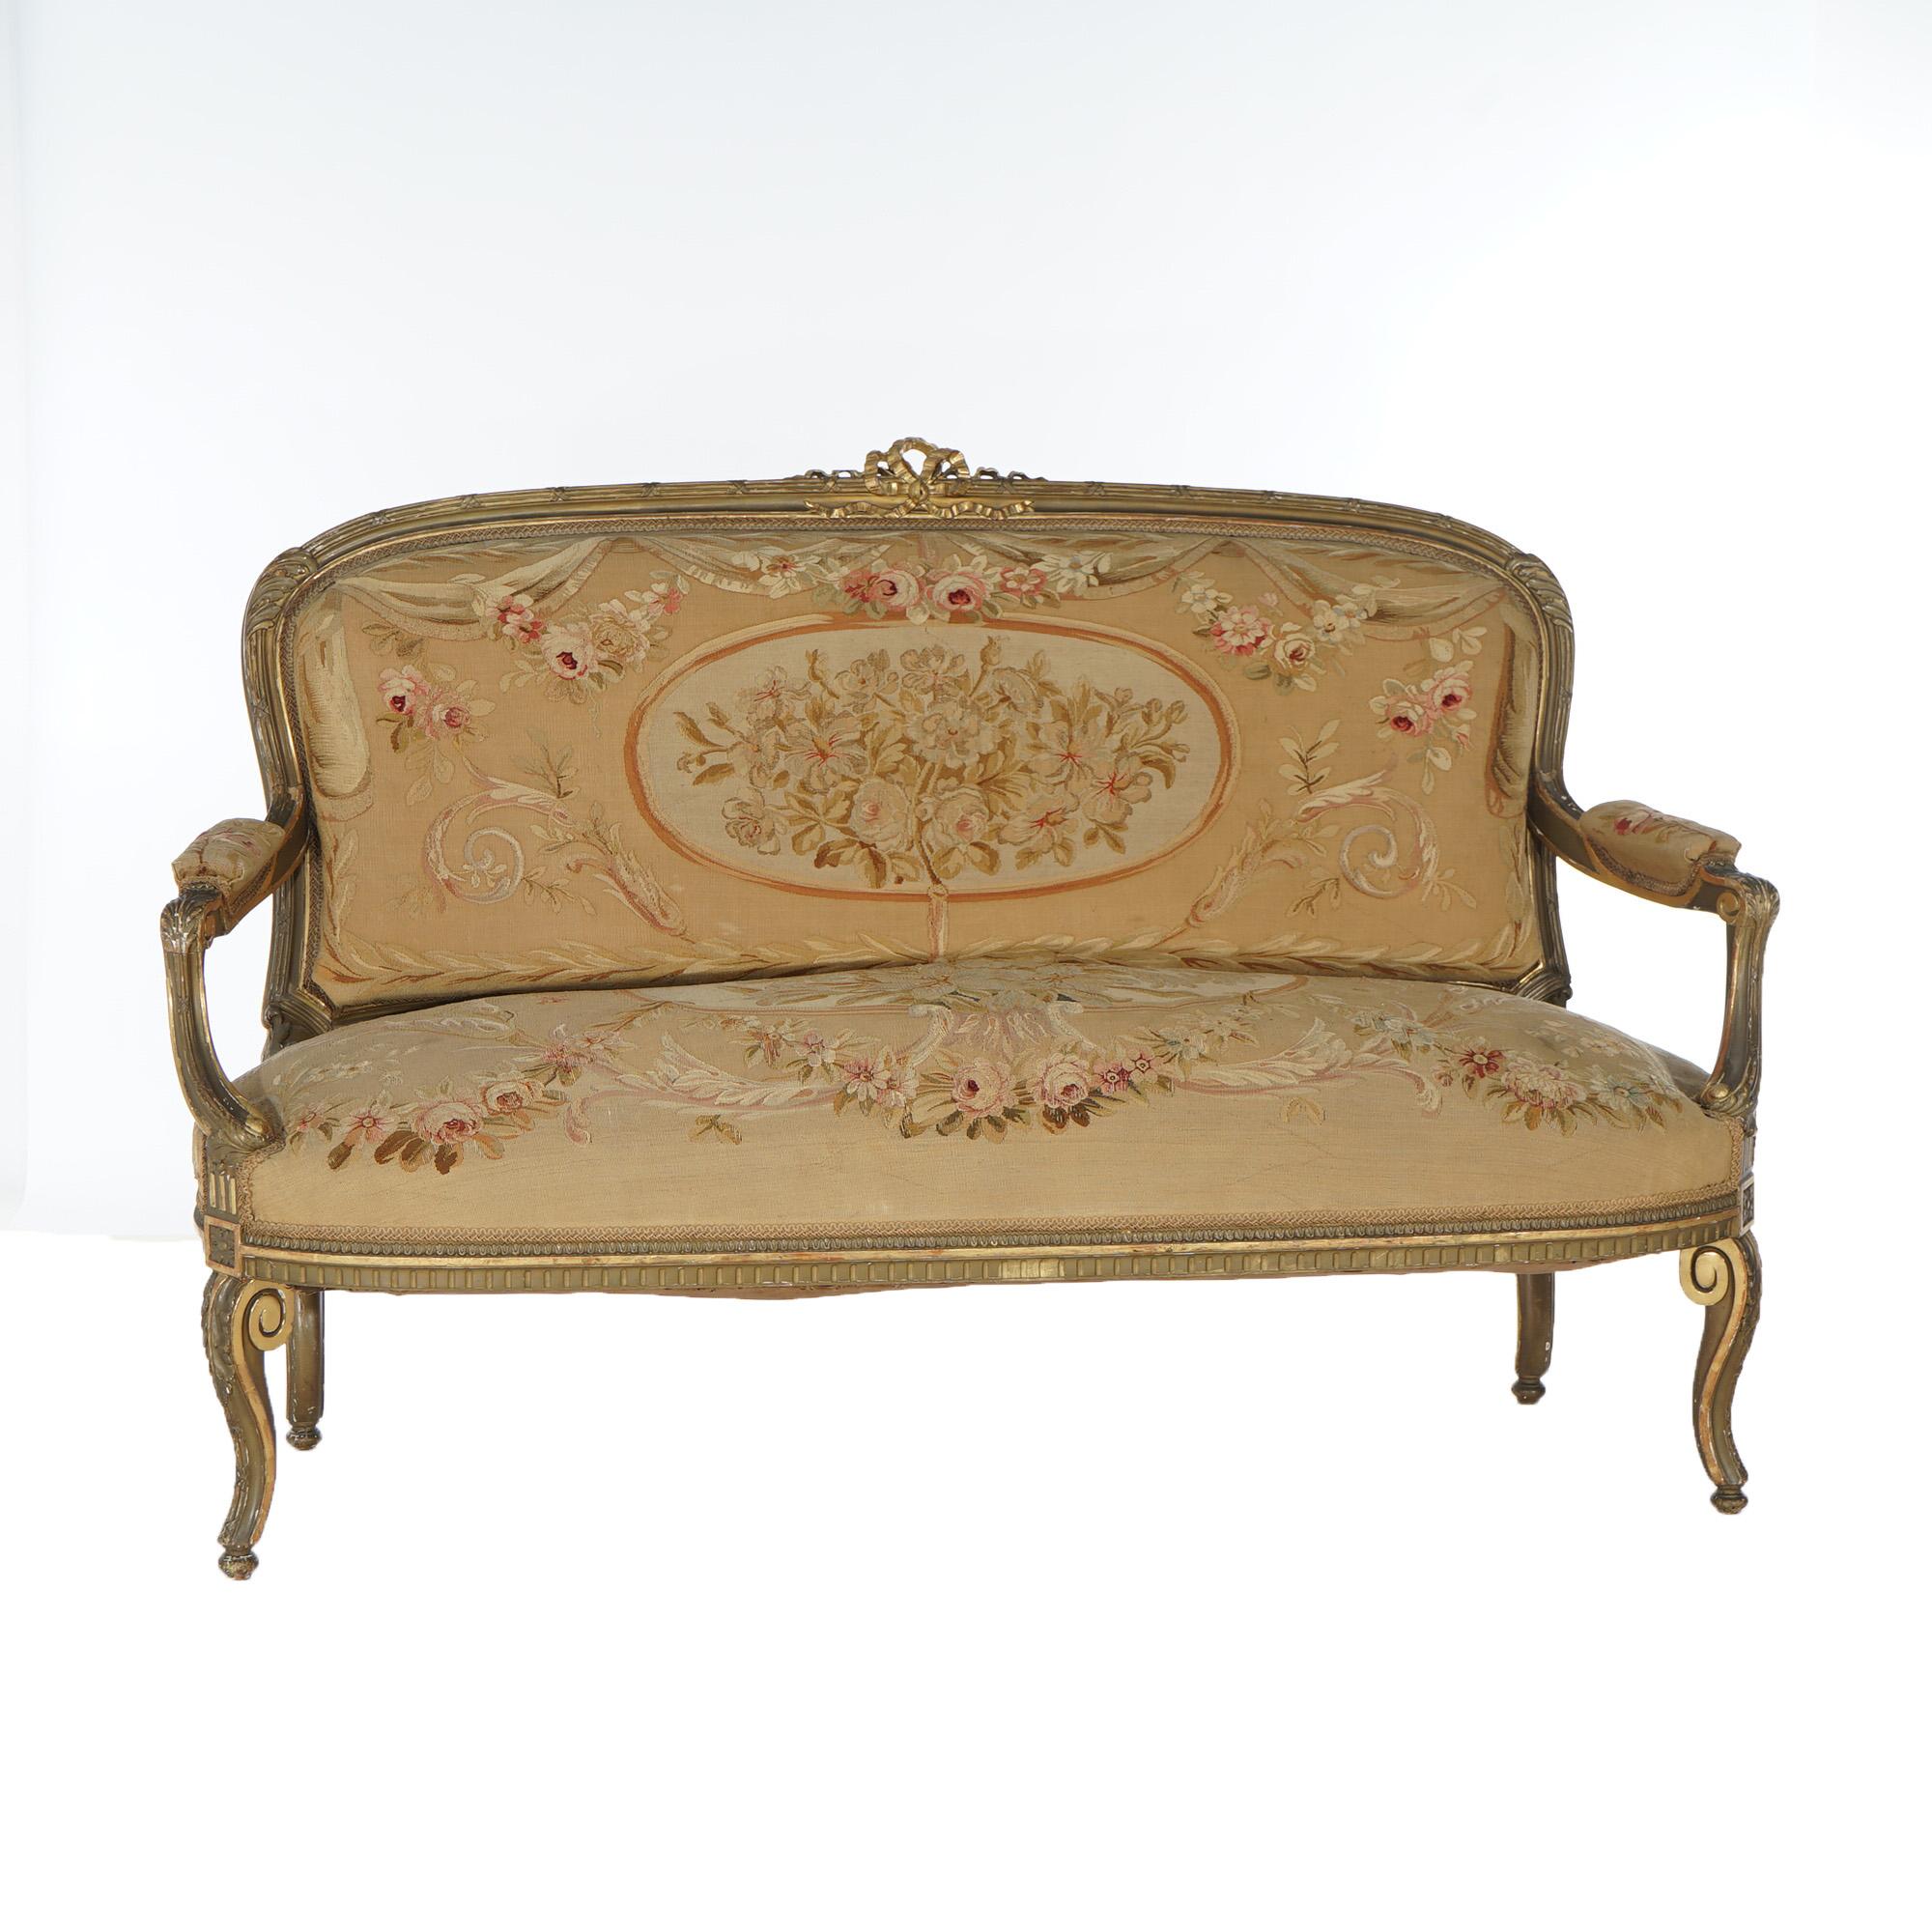 Antique French Louis XV Giltwood & Aubusson Tapestry Sofa C1860 For Sale 3